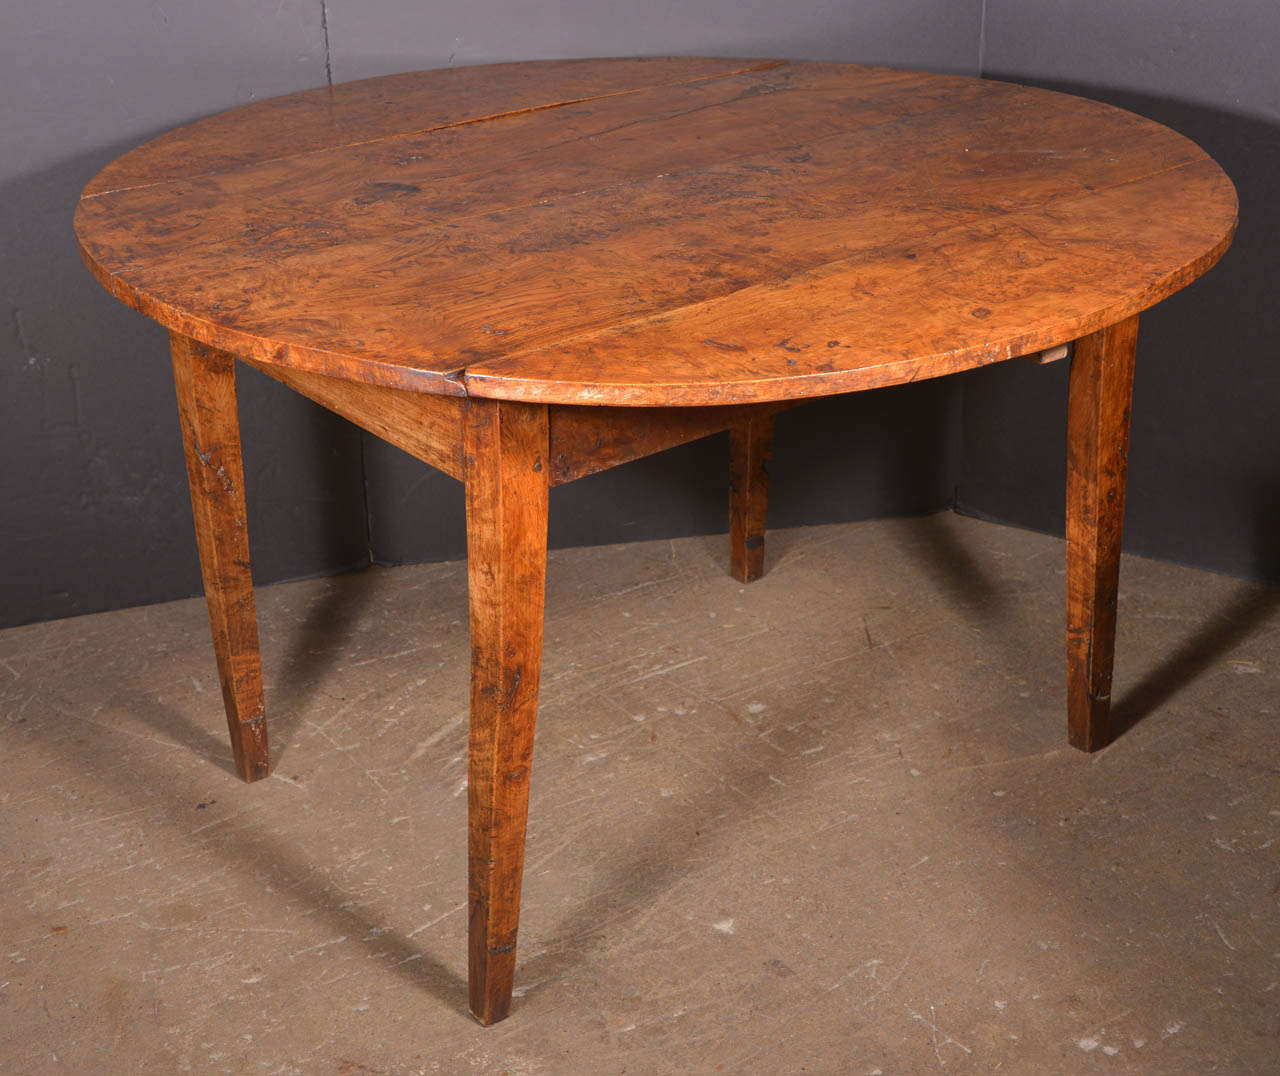 19th c. Burlwood Drop Leaf Table with tapered legs